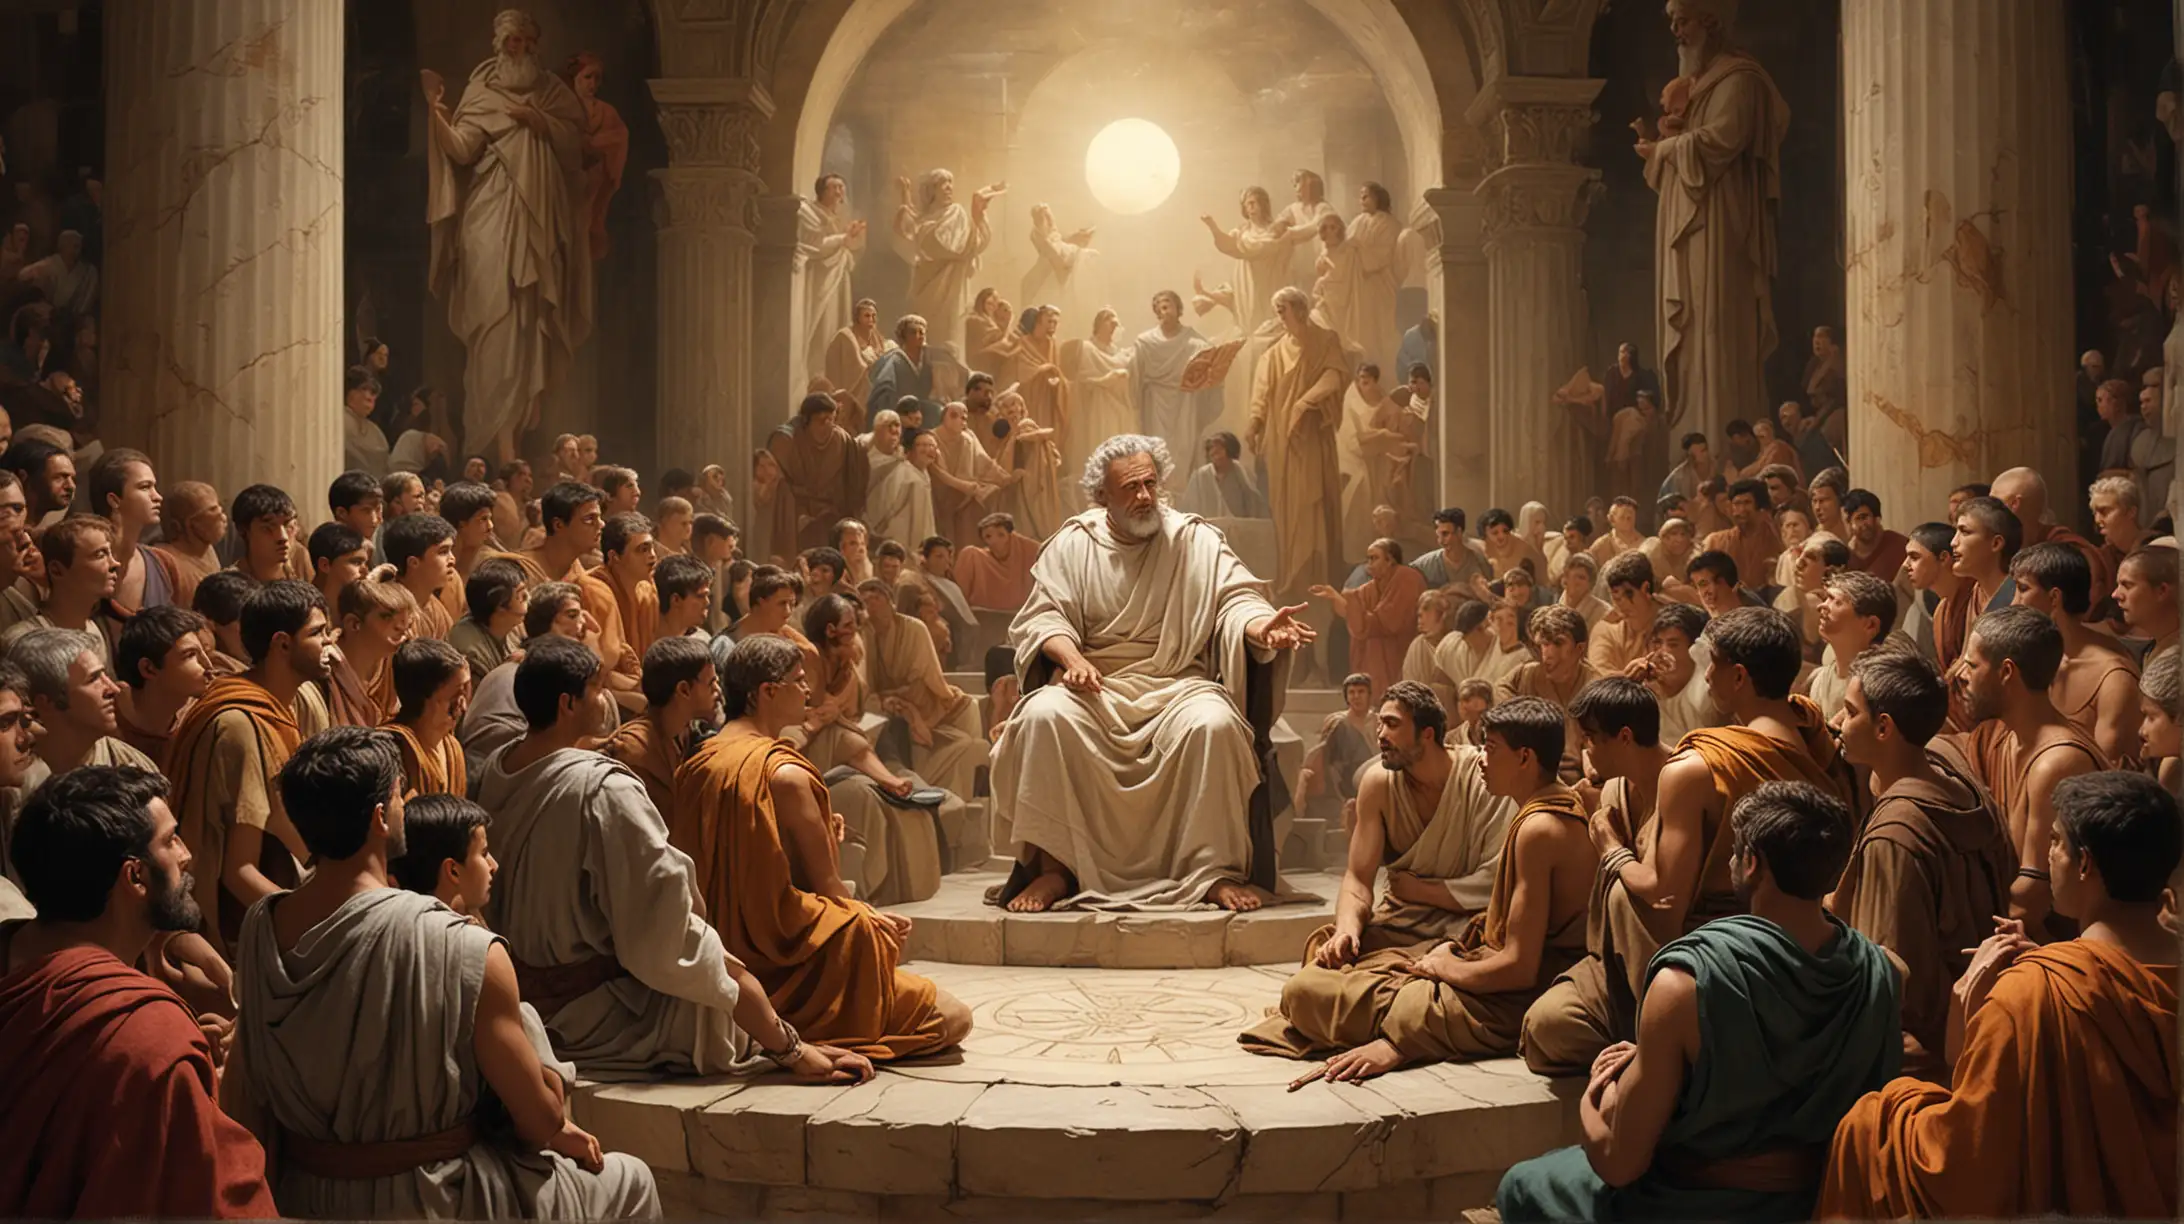  Generate visuals of a stoic philosopher mentoring a group of young citizens, imparting timeless wisdom and guidance.
Image Description: This image depicts a stoic philosopher surrounded by a diverse group of individuals, ranging from young adults to elders, gathered around him in a circle. With a commanding presence, he gestures towards a scroll containing stoic teachings, while his attentive audience listens intently, absorbing his words with reverence. The scene captures the spirit of mentorship and community as the philosopher empowers others to embrace their civic and social responsibilities.